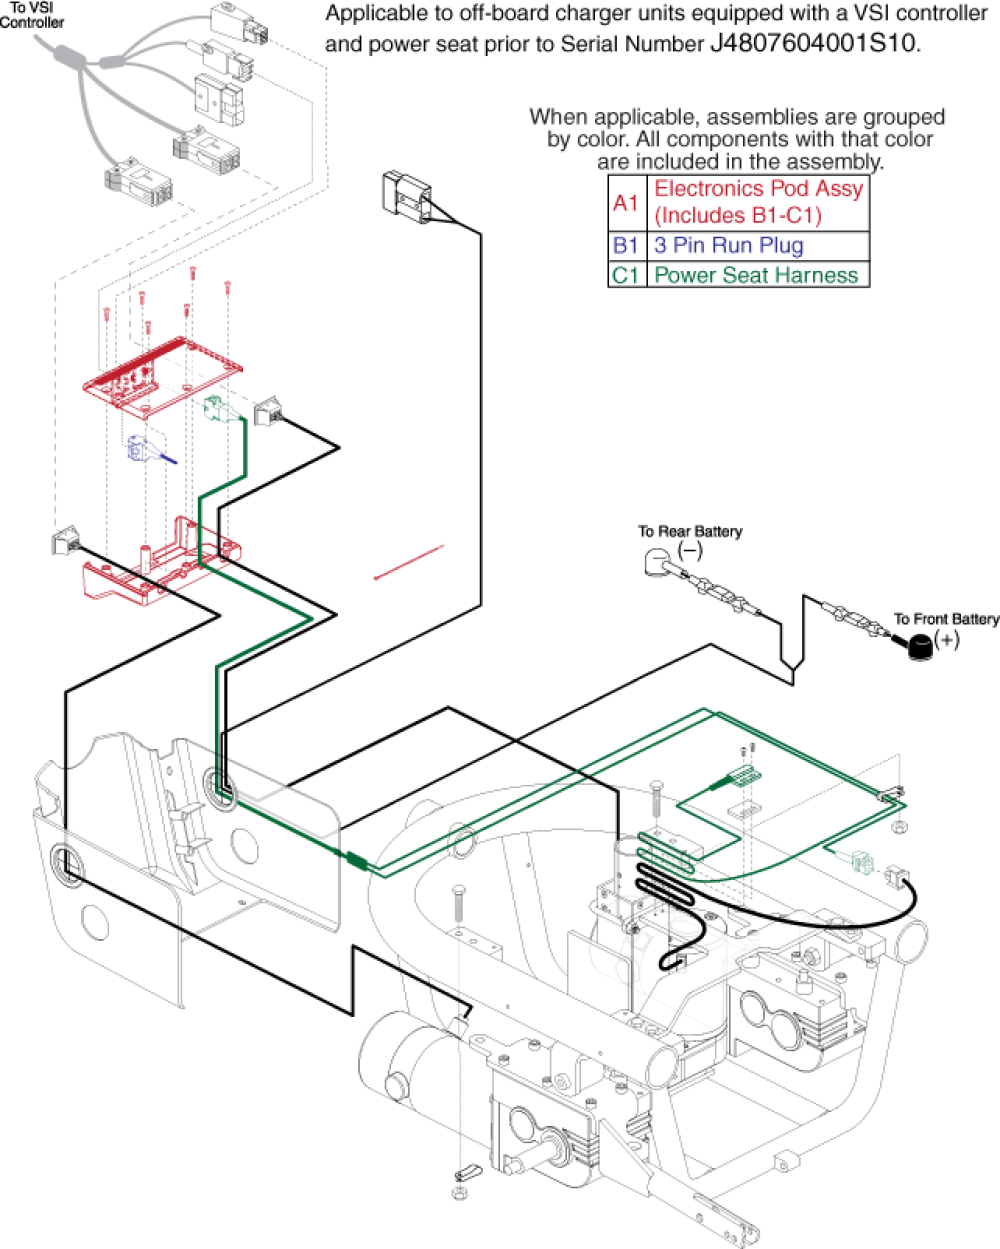 Electronics Tray Assembly - Vsi, Power Seat, Off-board parts diagram